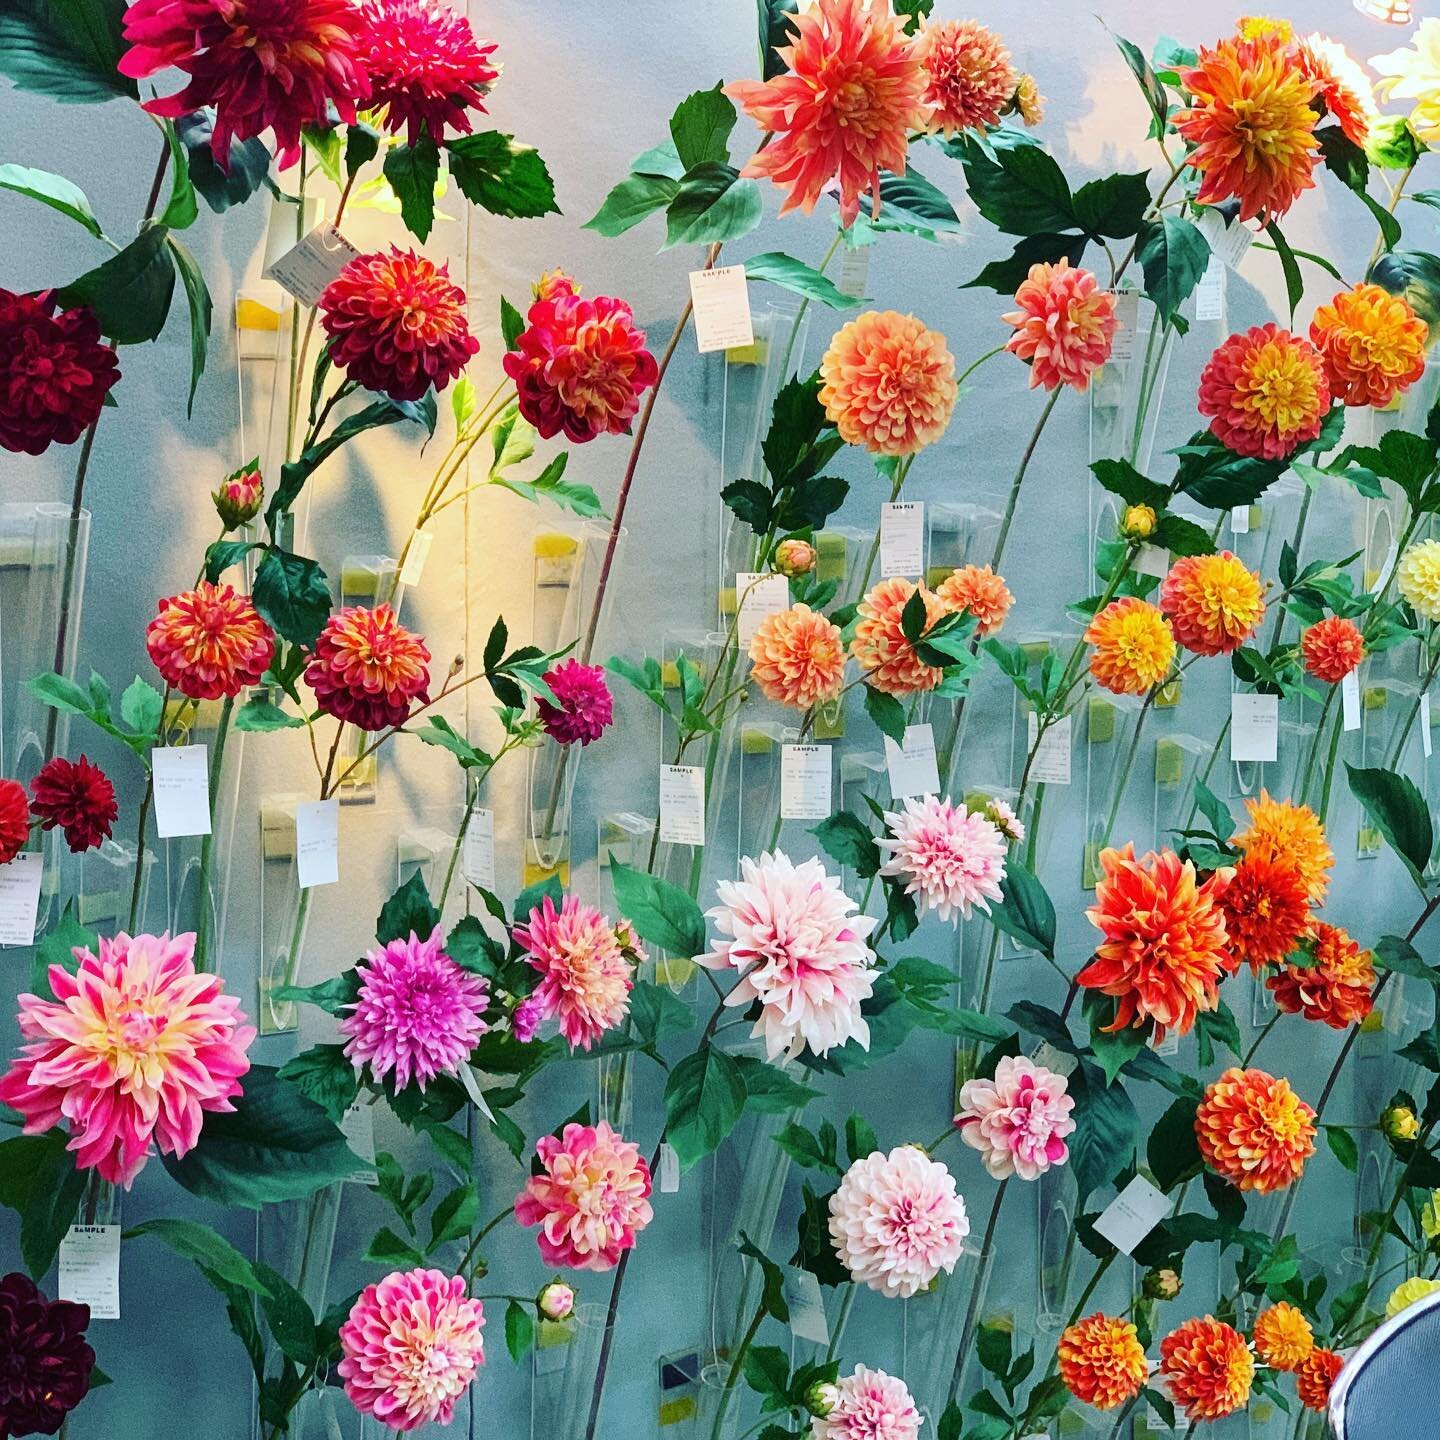 Darren and I were bowled over by these beautiful Dahlias. The varieties and colours were sublime. #silkflowers#artificialflowers#newcollection#florist#stylist#florals#blooms#floralinspiration#fauxflowerstyling#homedecor#uniqueflowers